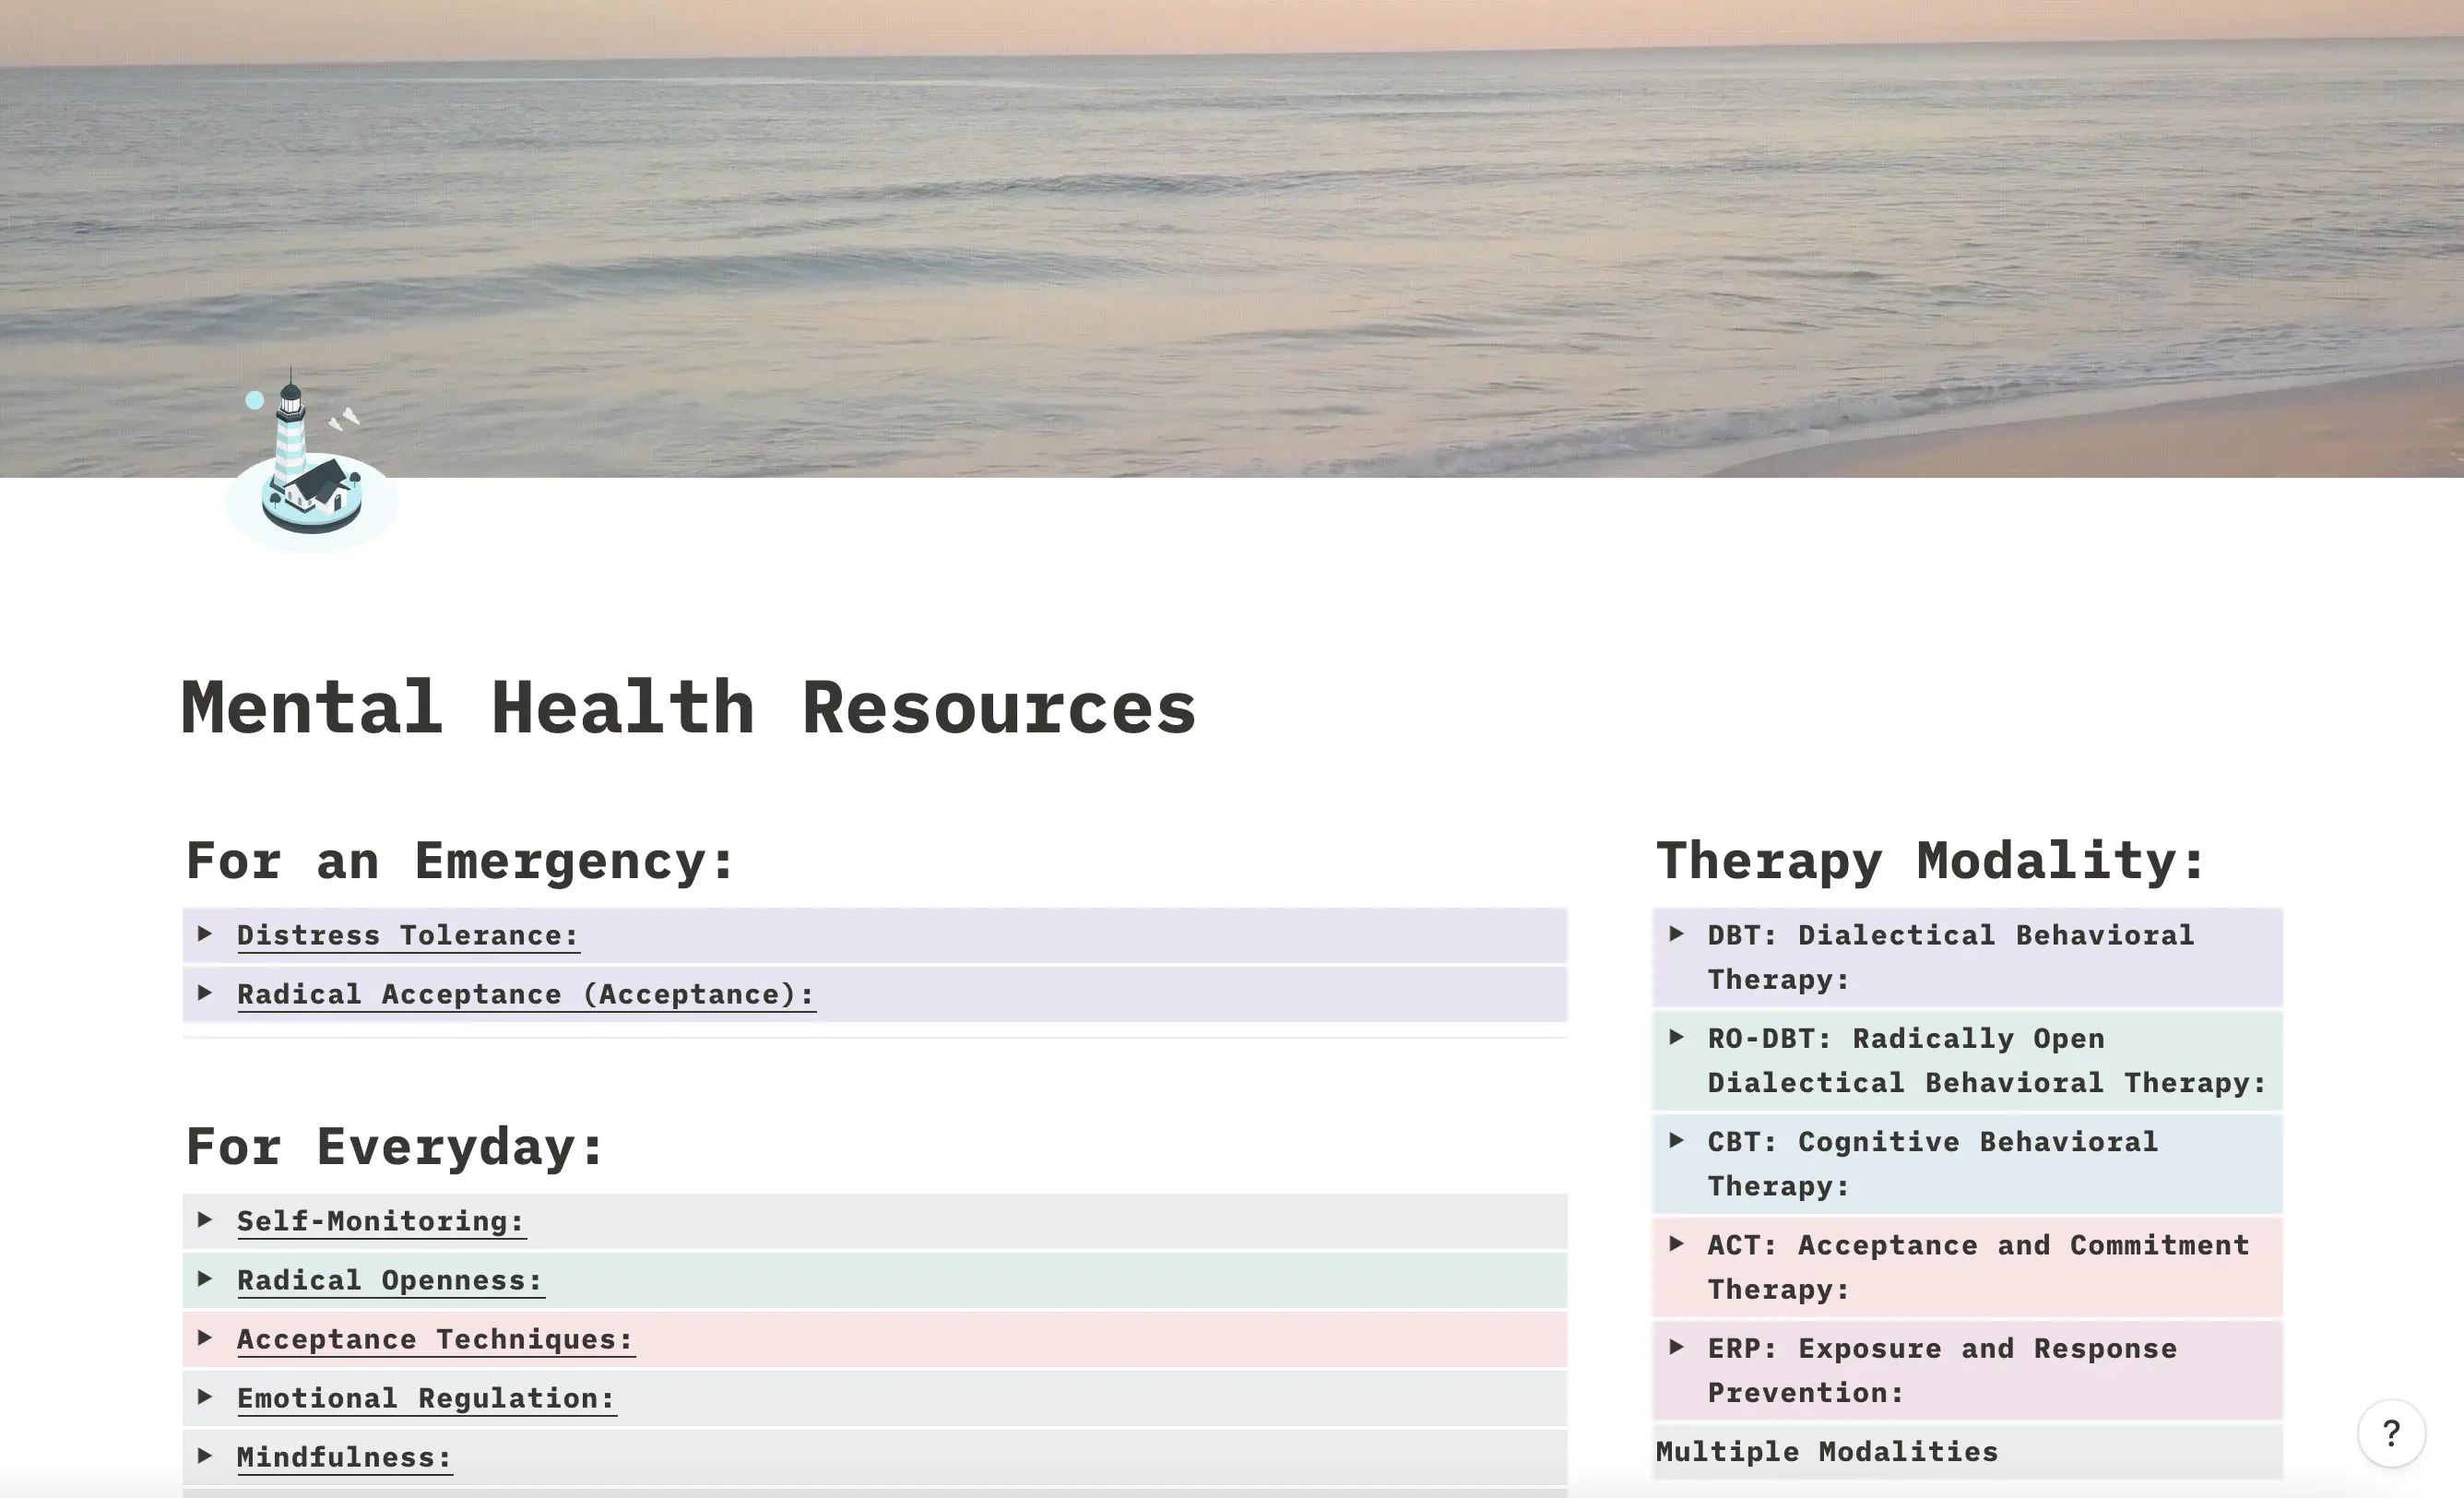 Mental Health Resources Template image